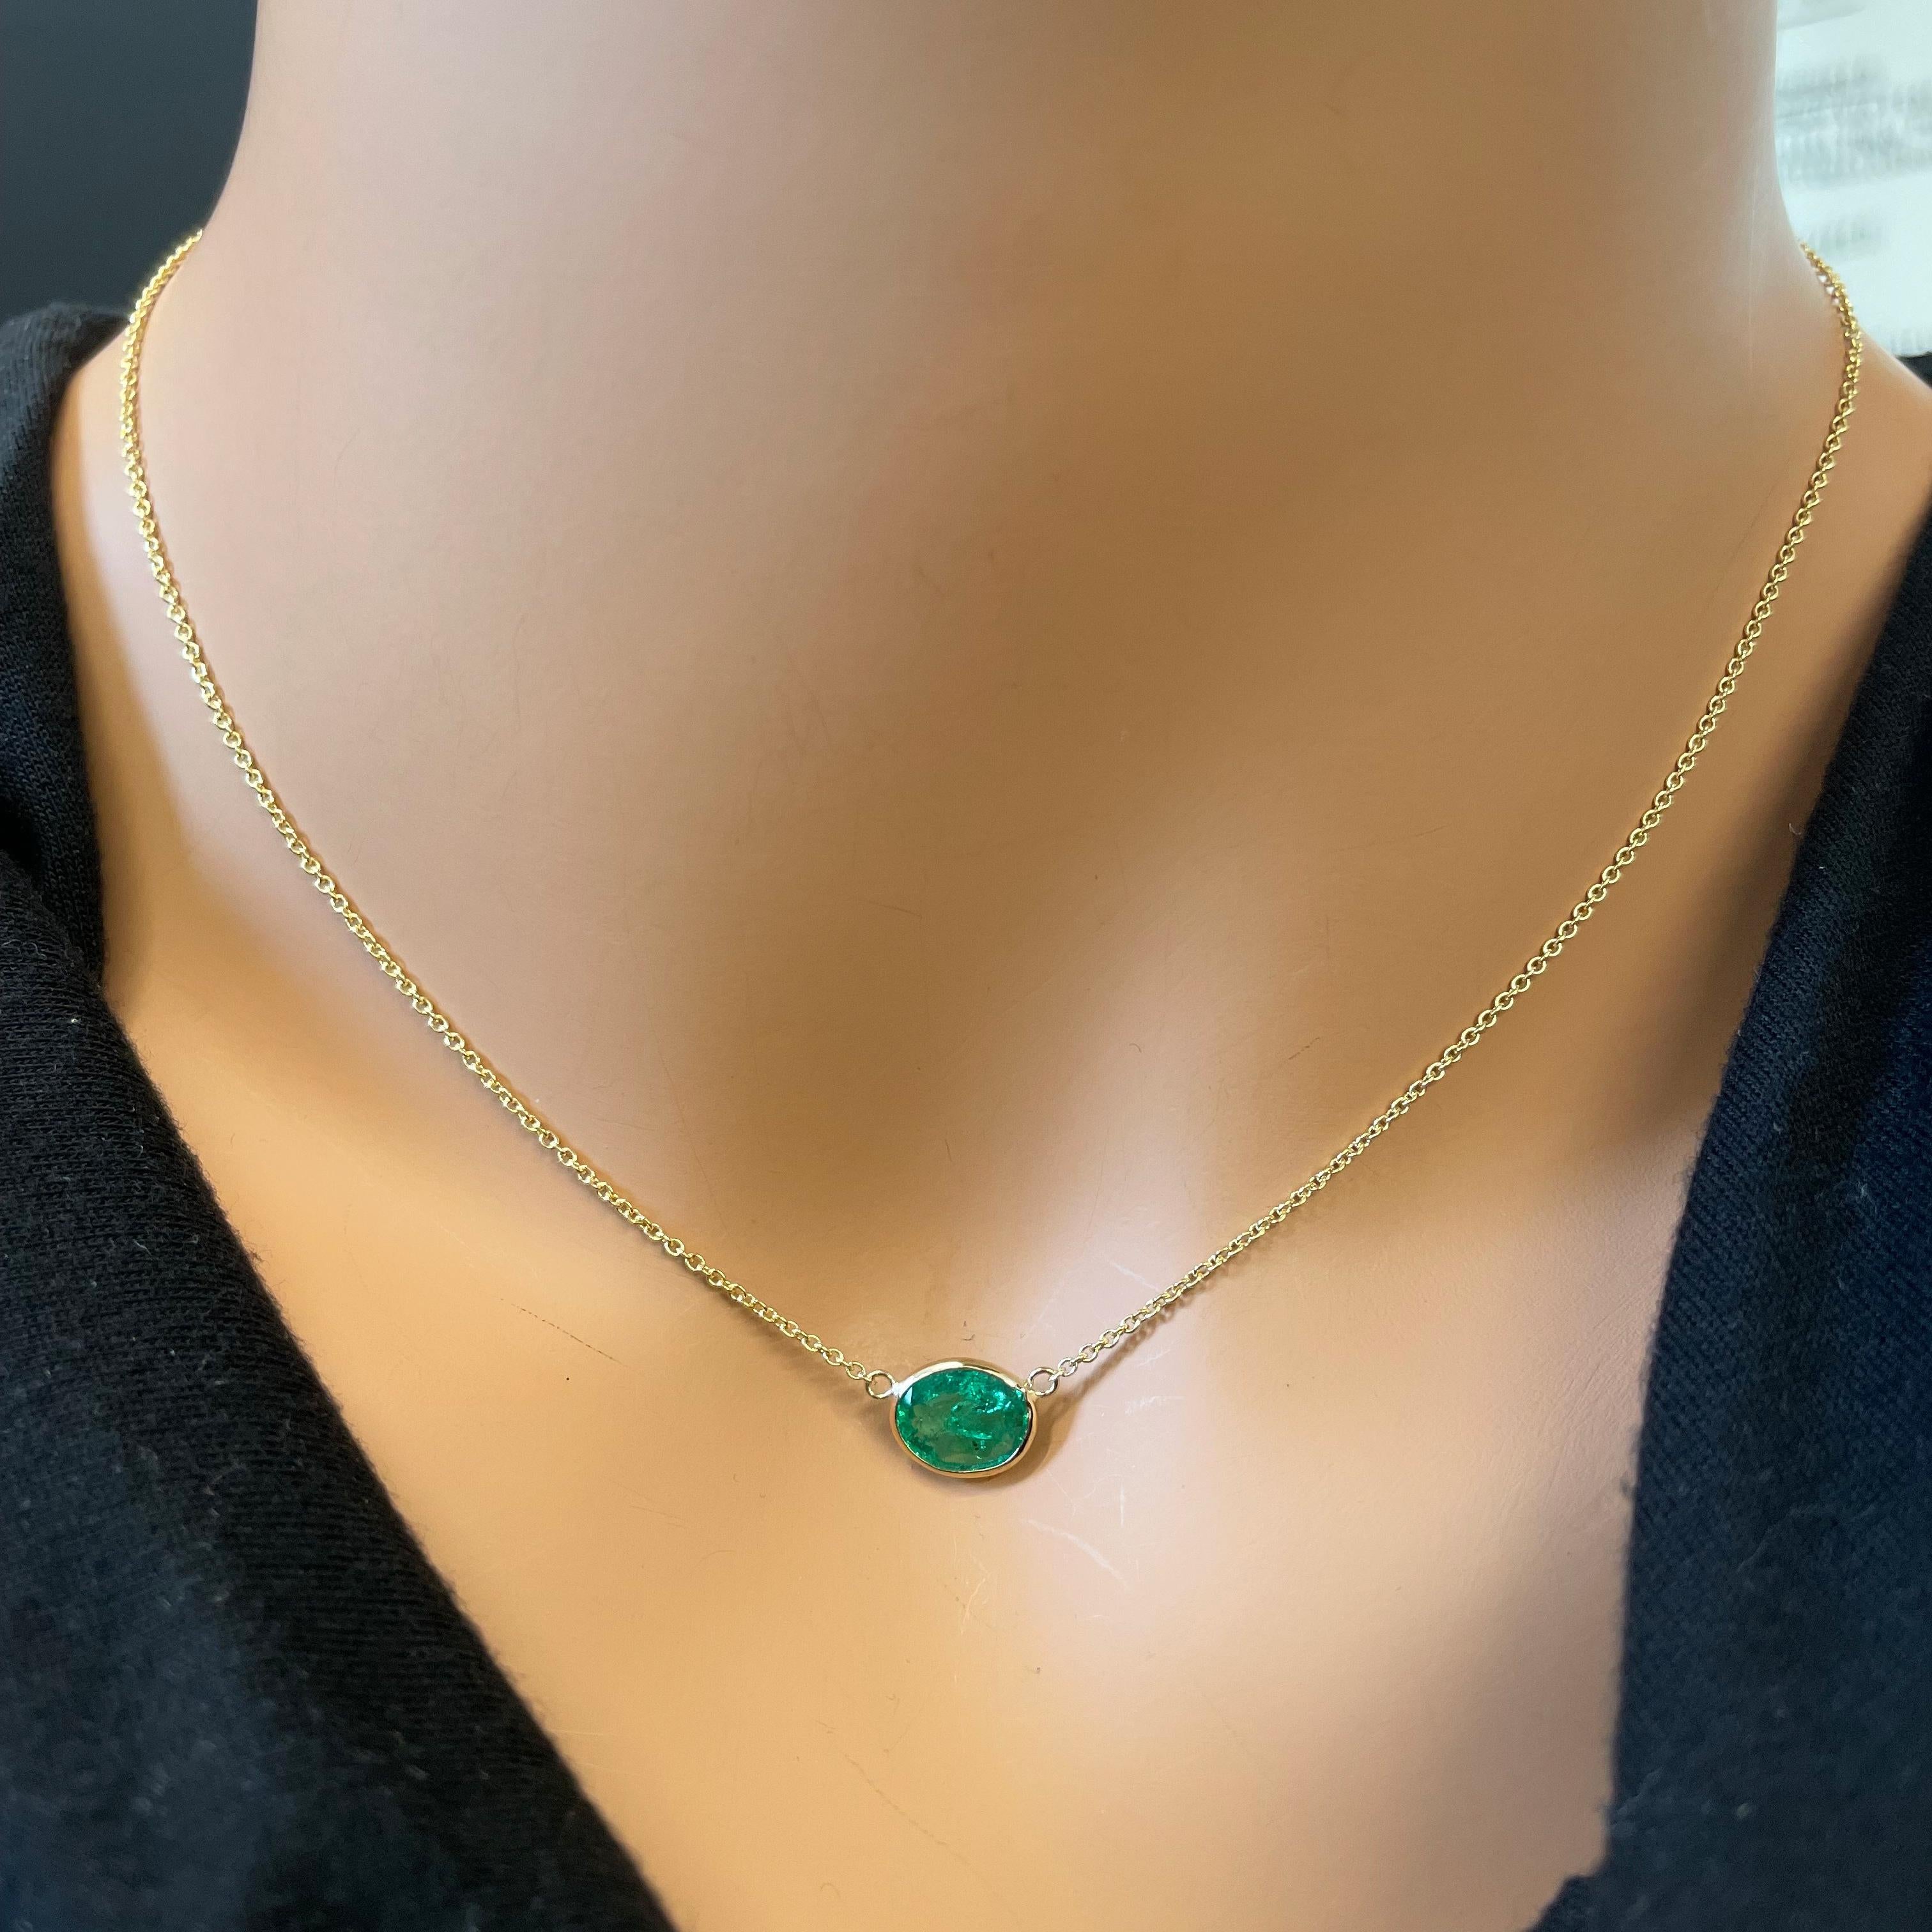 Contemporary 1.96 Carat Green Emerald Oval Cut Fashion Necklaces In 14K Yellow Gold For Sale